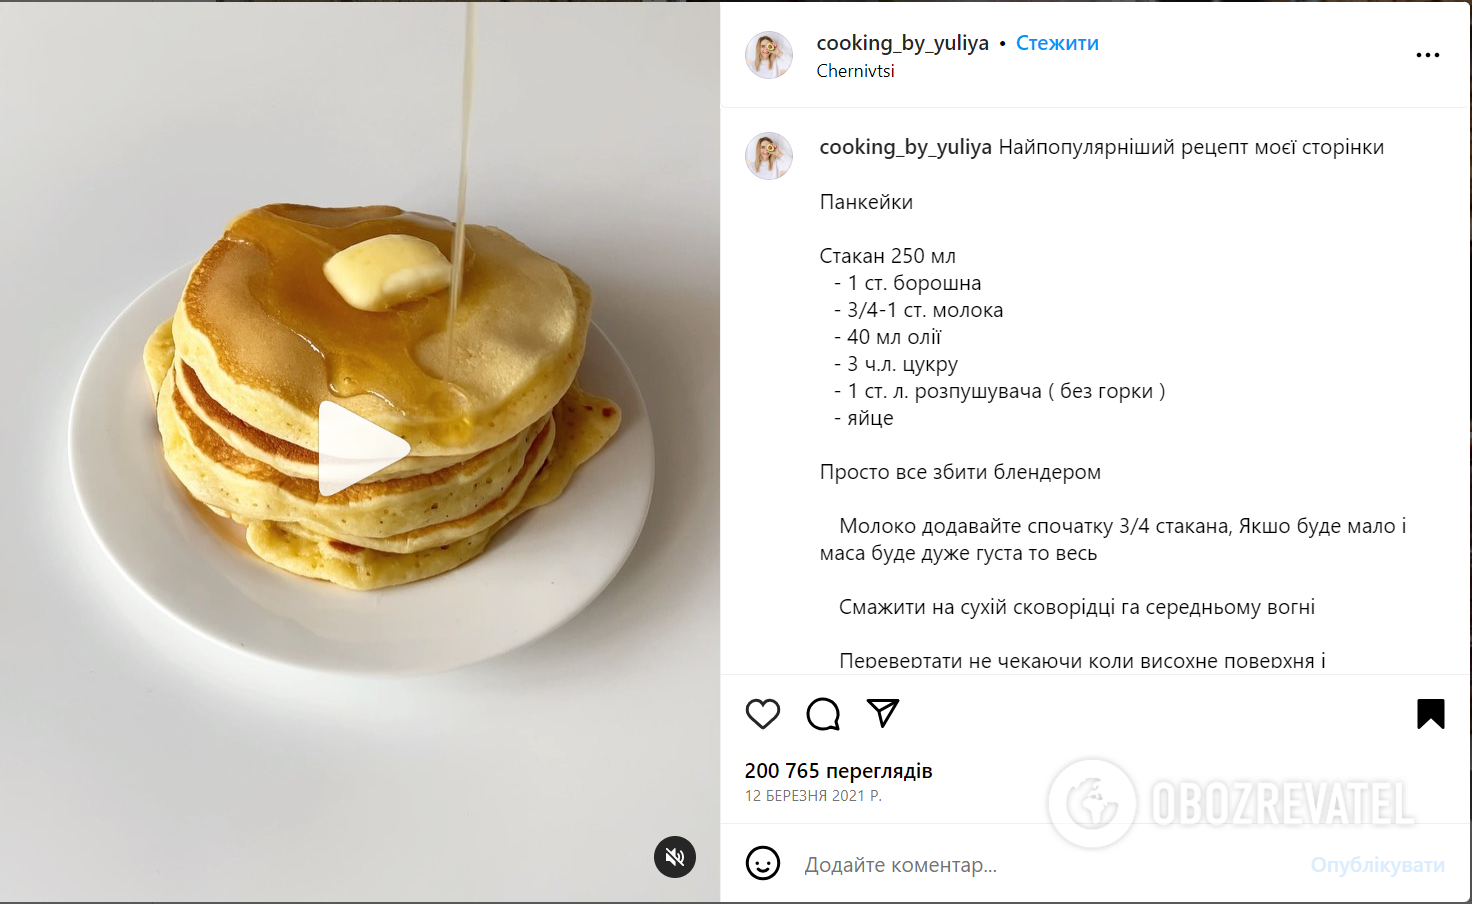 Perfect pancakes that always turn out puffy